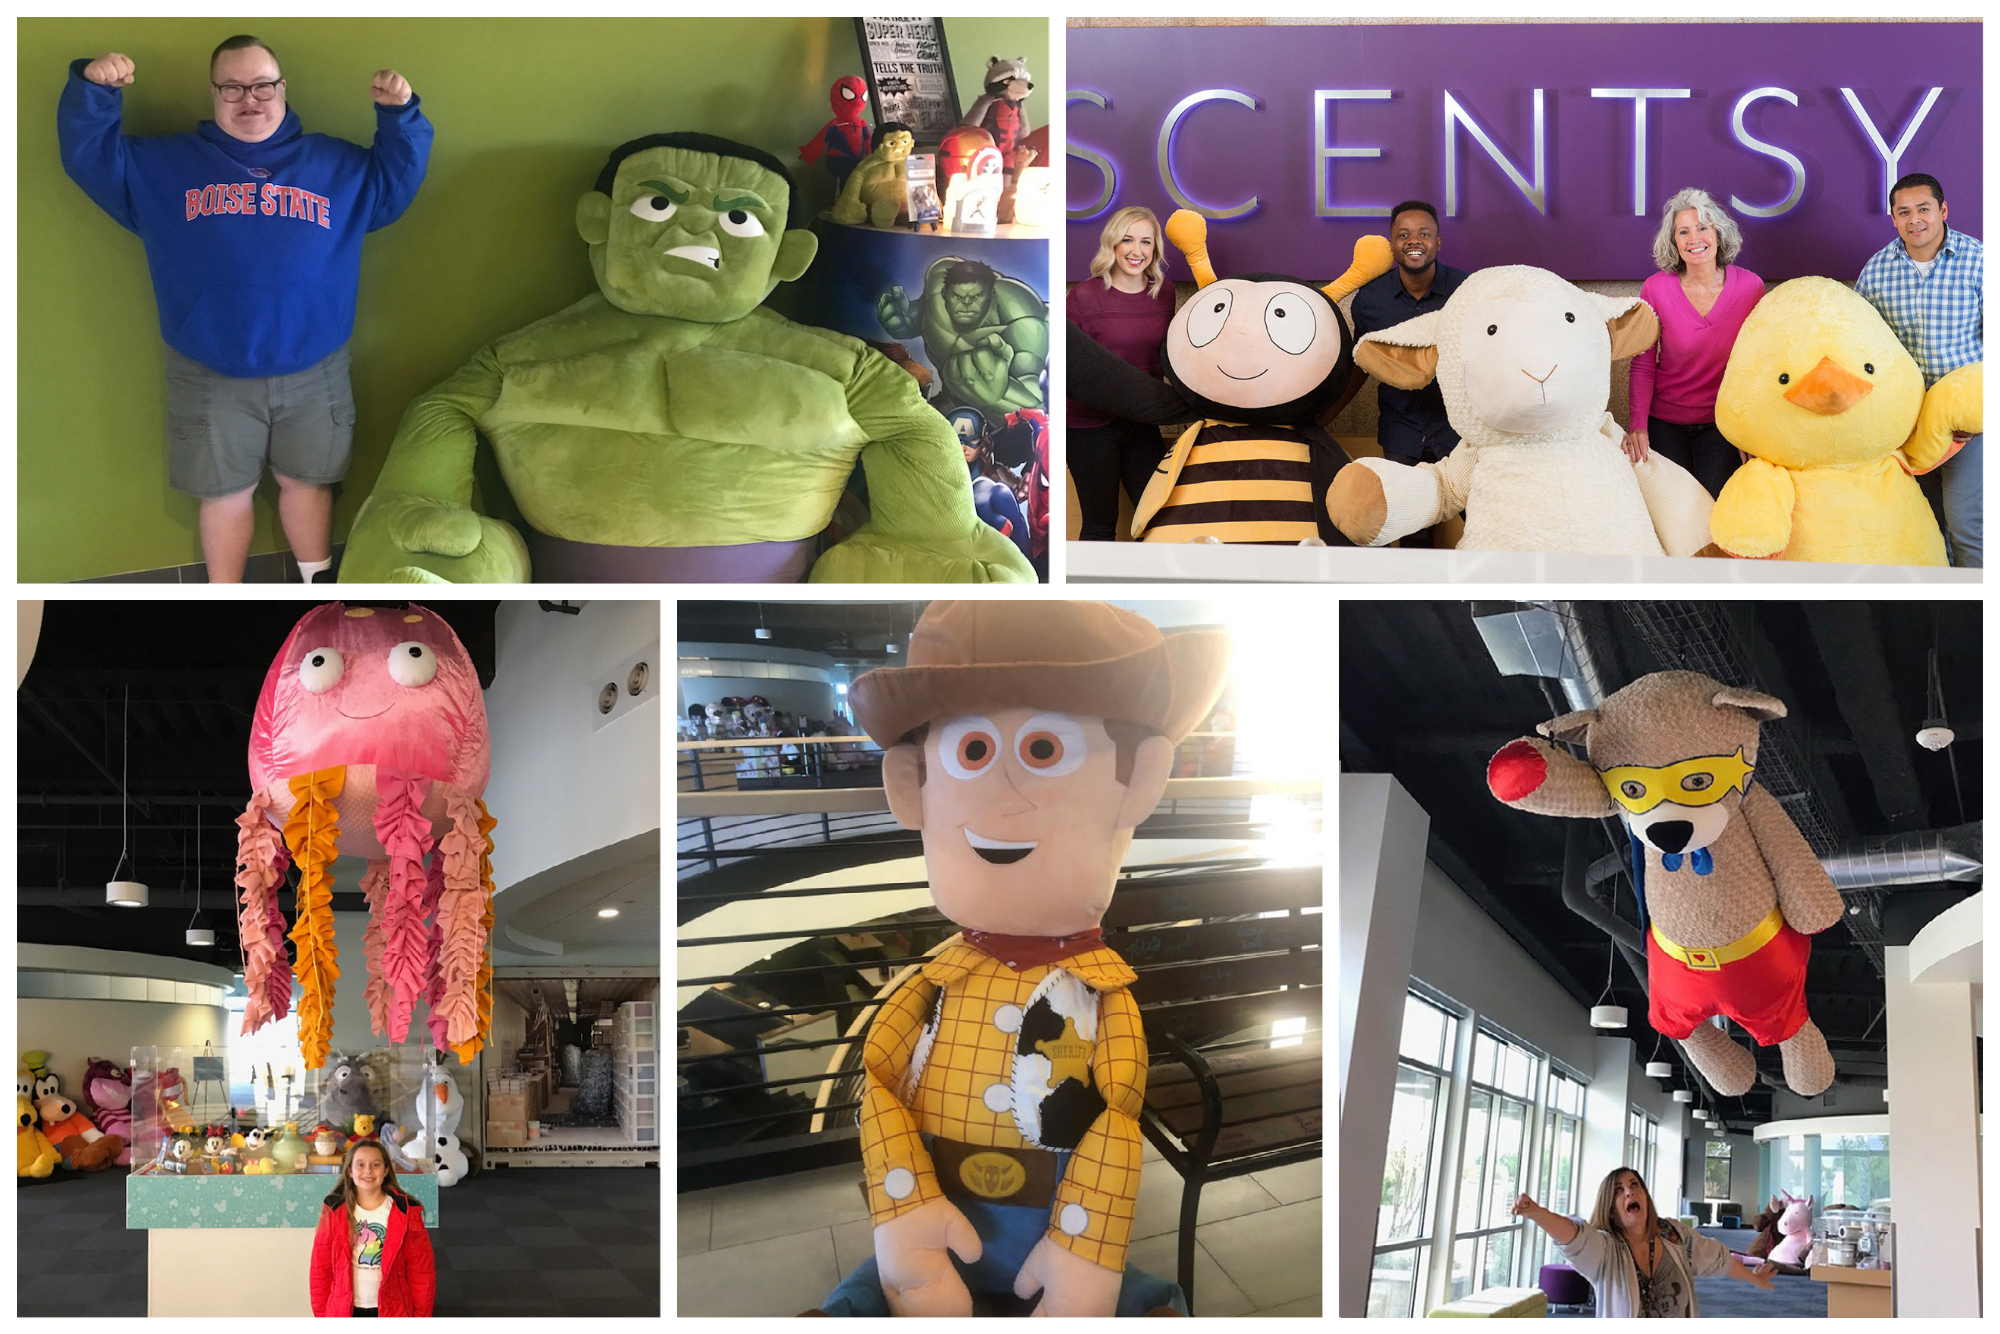 Giant Scentsy Buddies at Scentsy's Home Office In Meridian